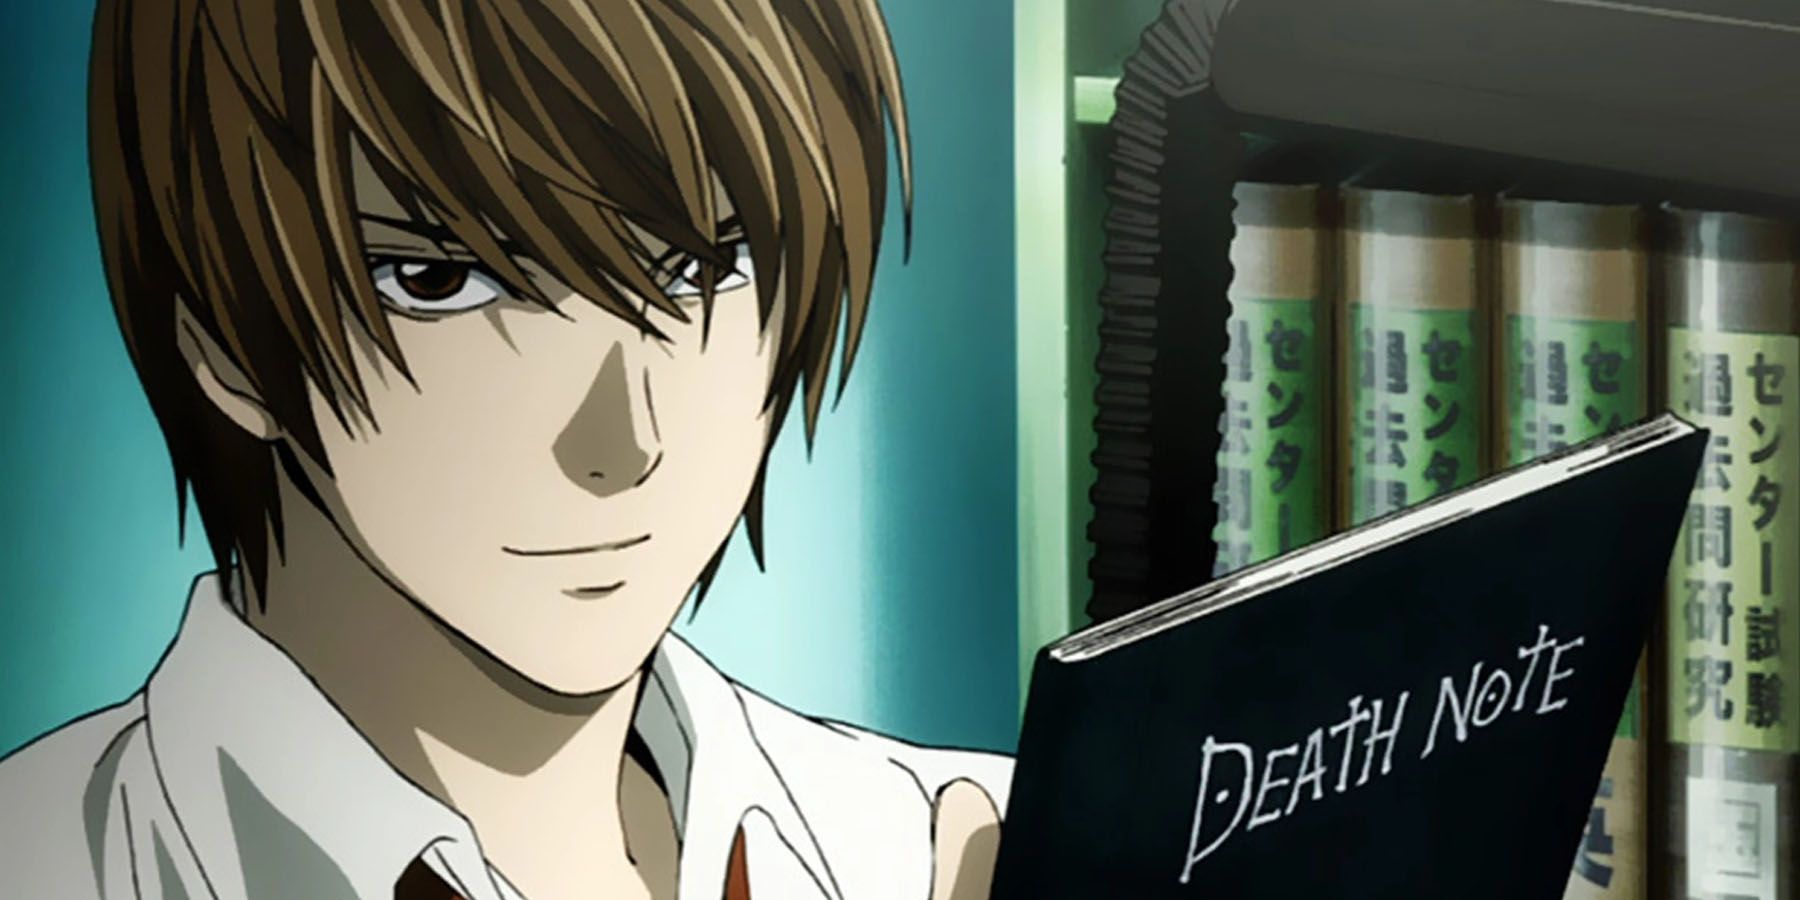 Light Yagami of Death Note